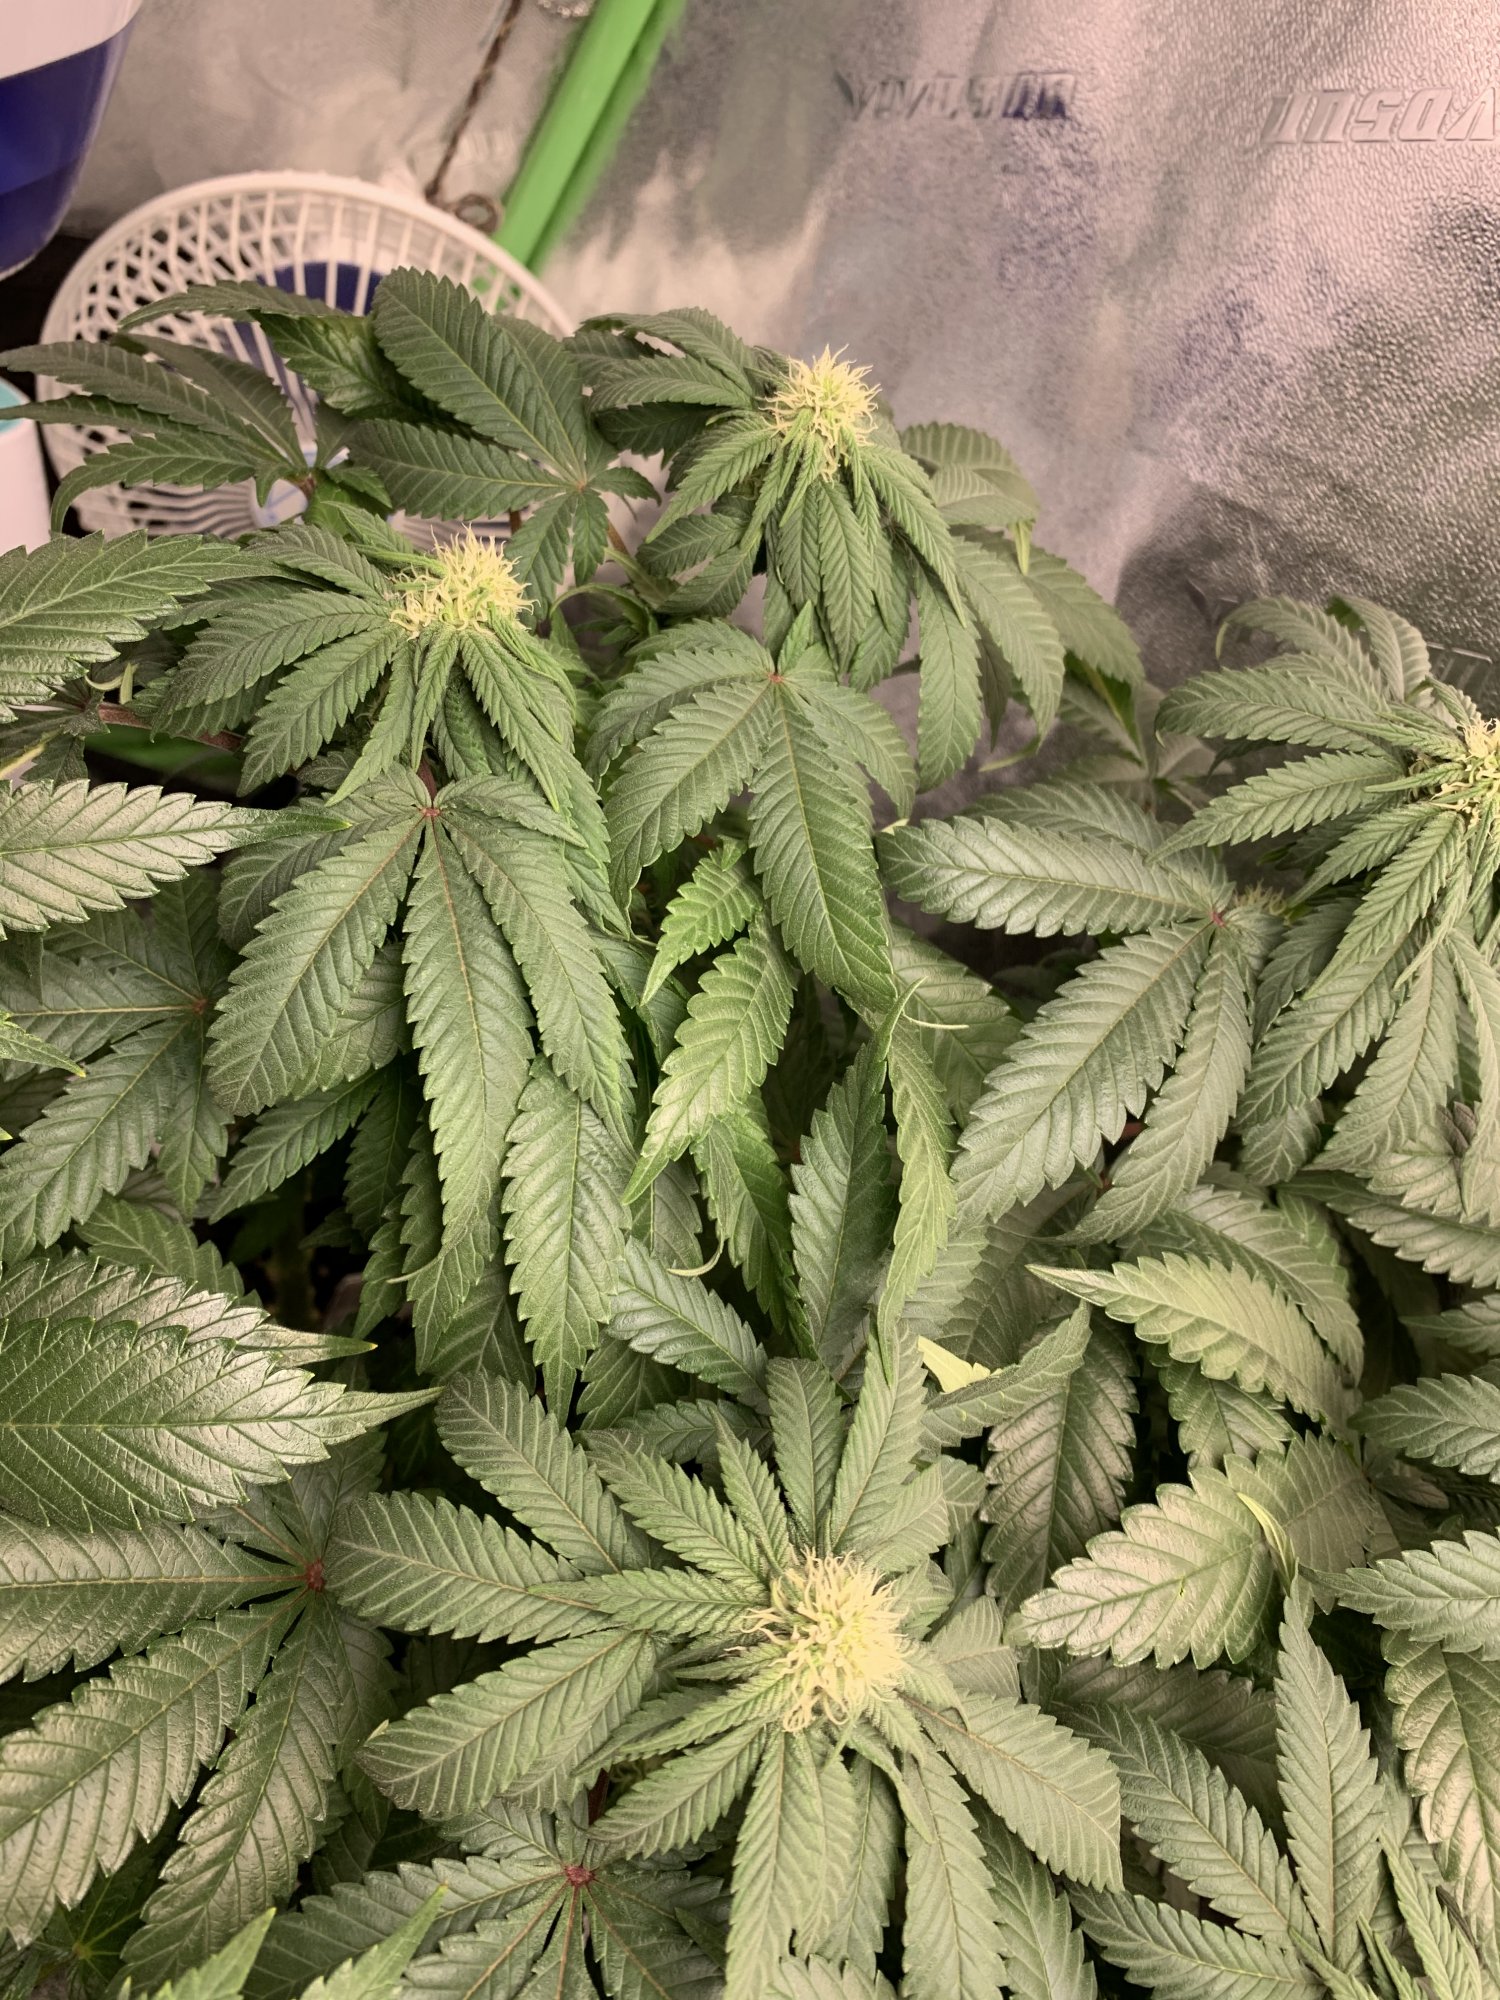 Over watering or a deficiency